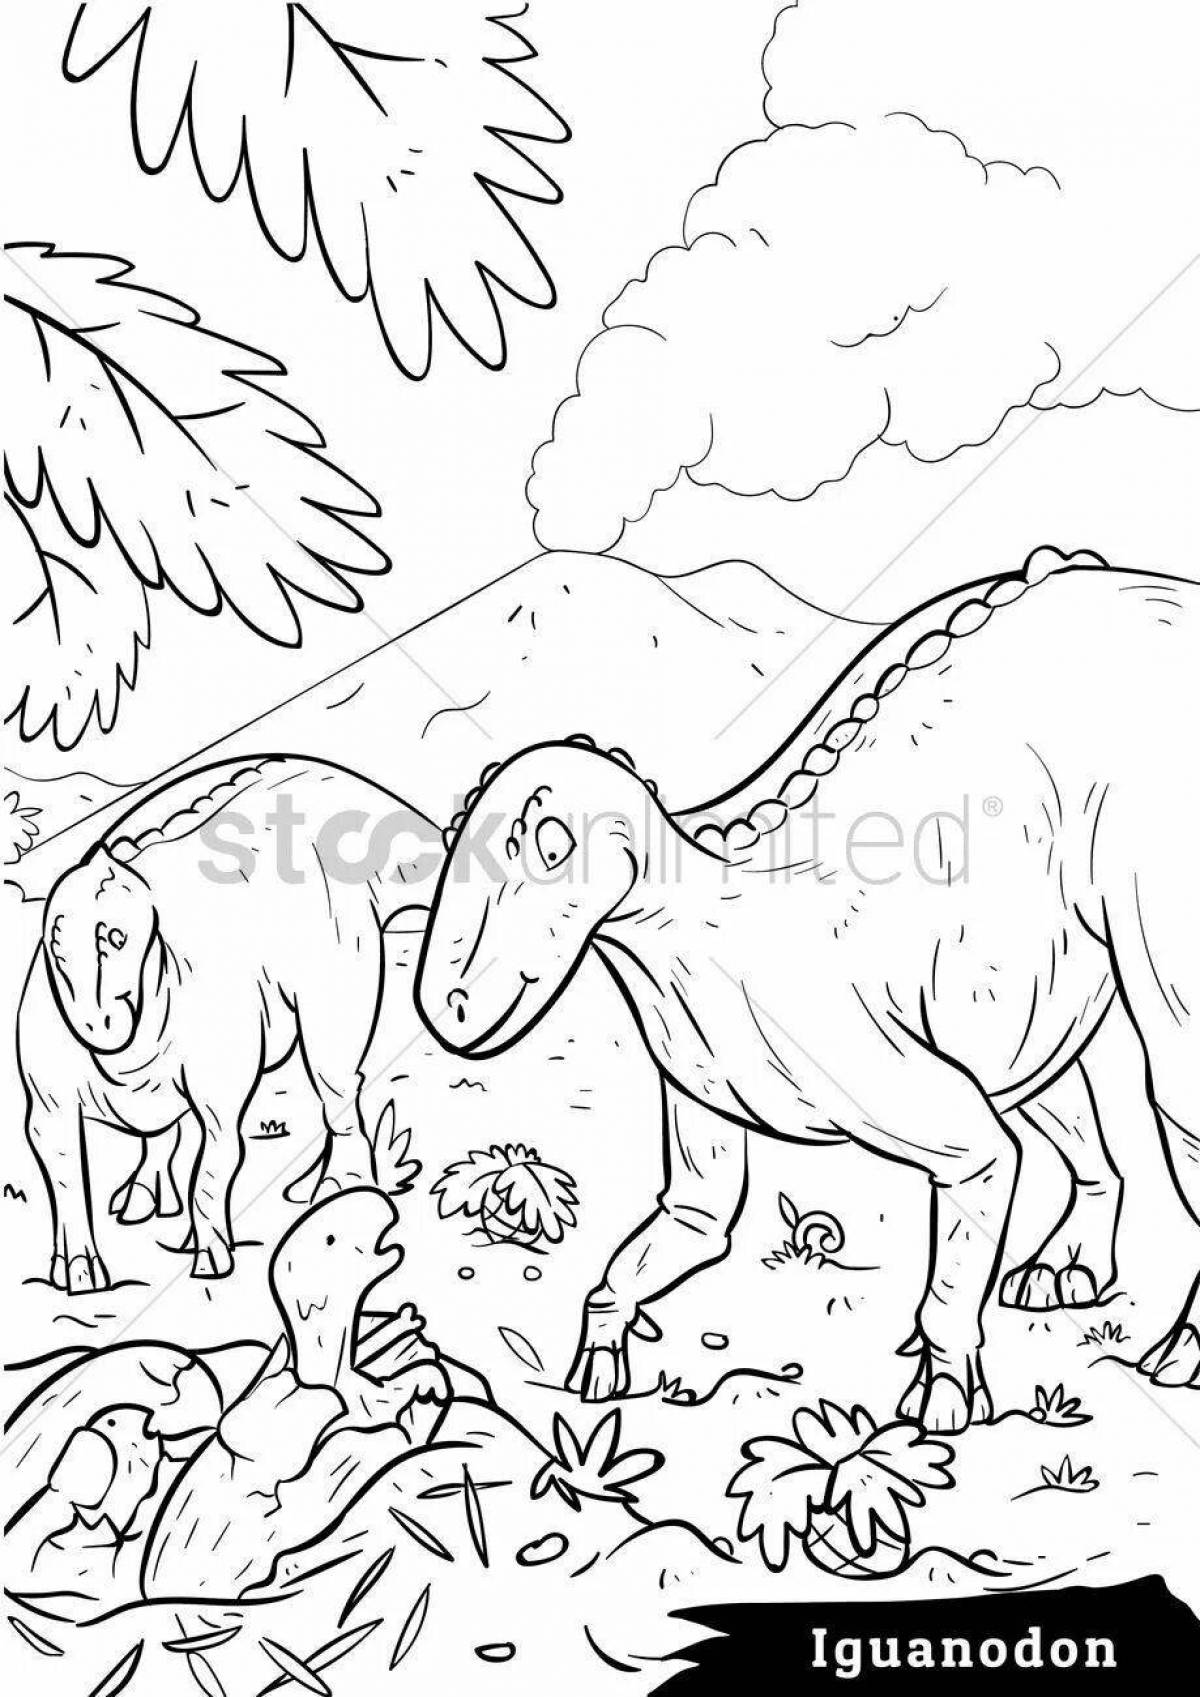 Vibrant iguanodon coloring page